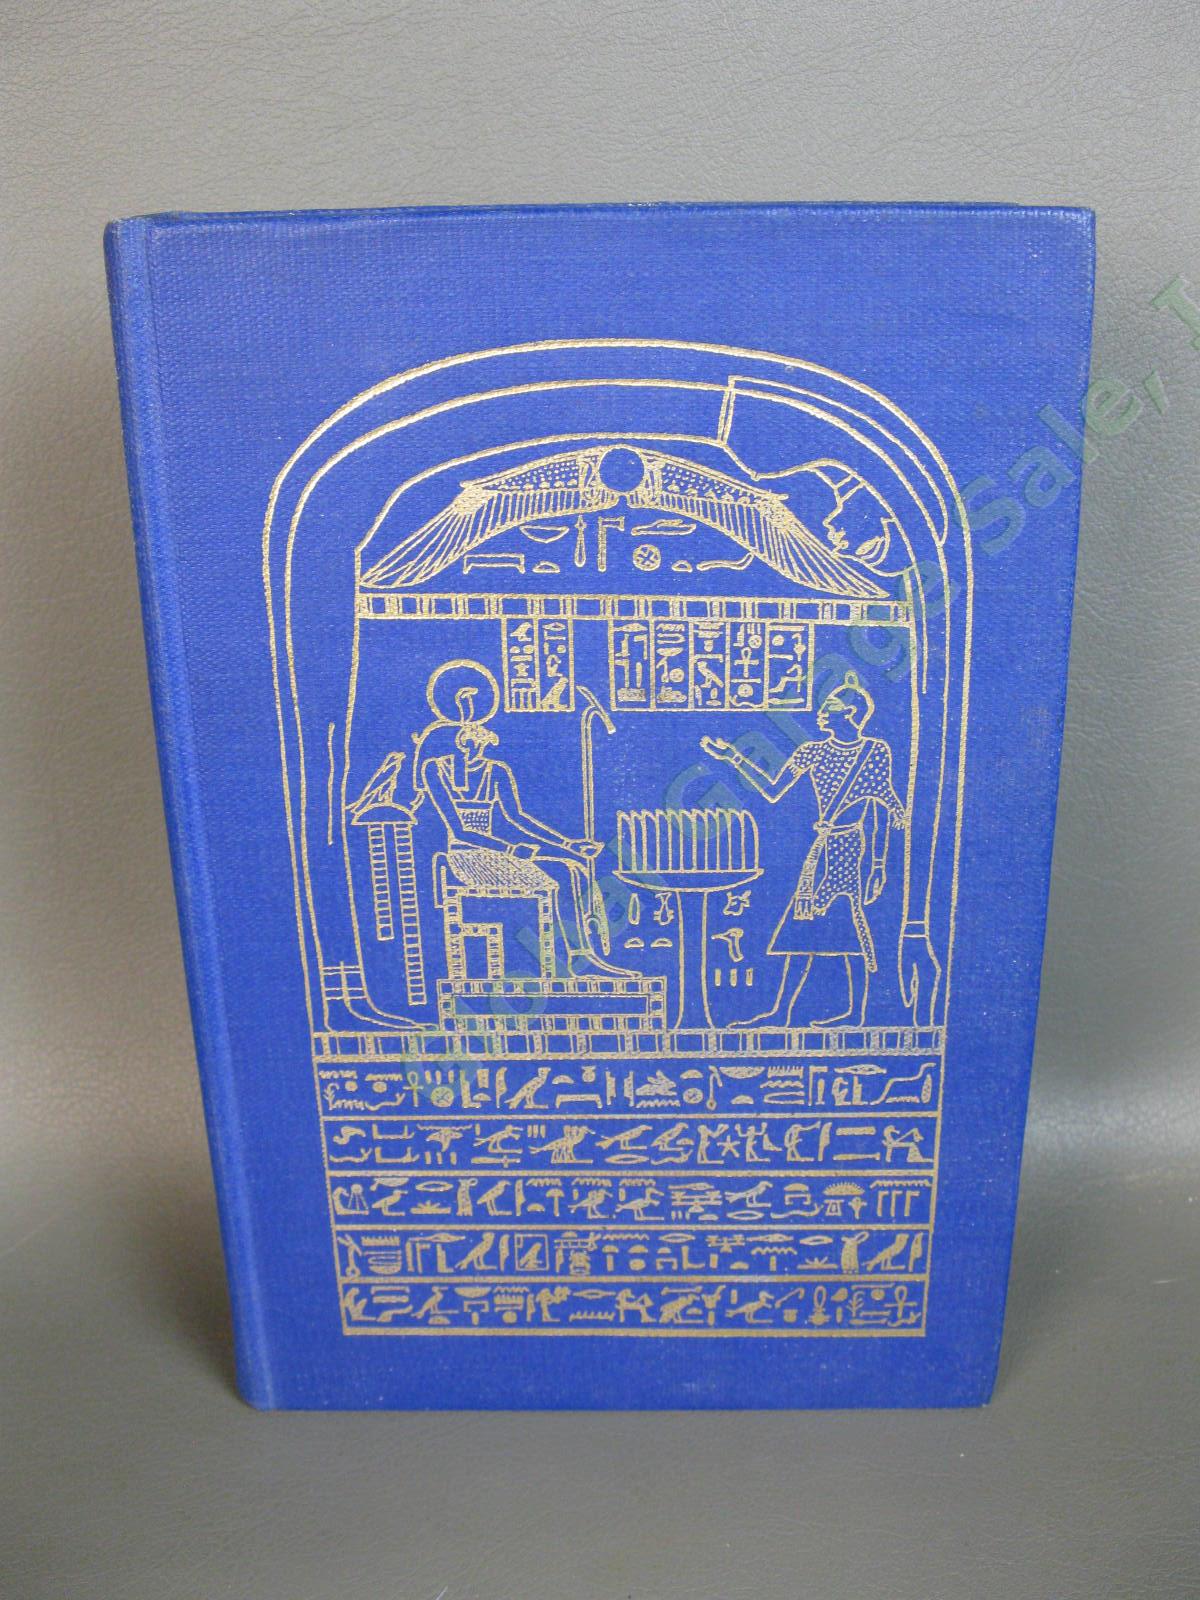 Aleister Crowley Magical Philosophical Commentaries on the Book of Law Grant NR